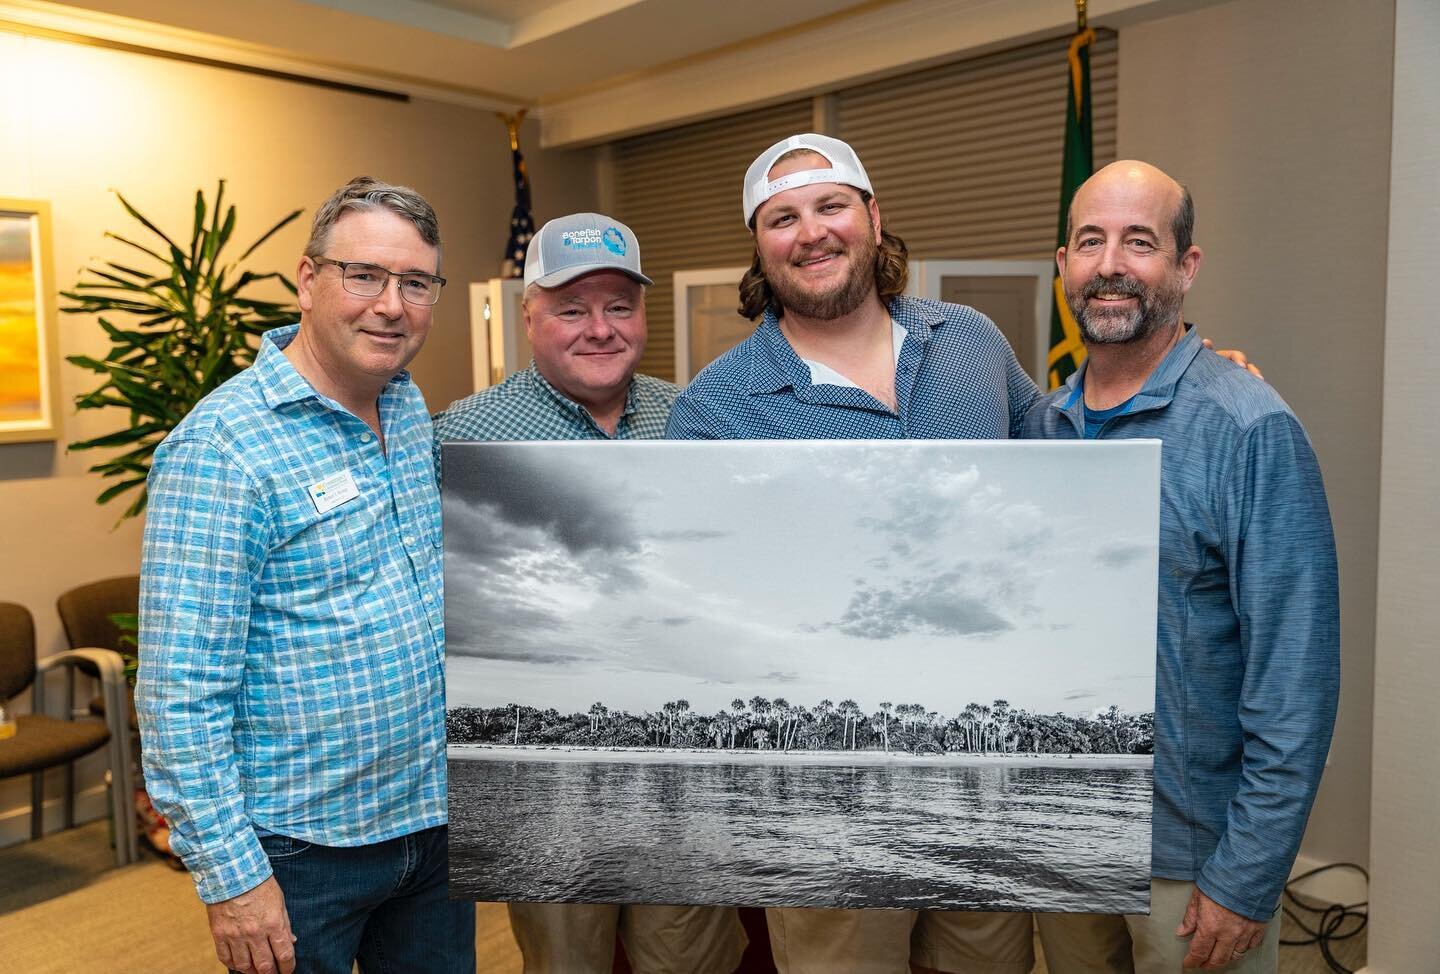 Another great @conservancyswf Red Snook Tournament in the books with EJ @flyasalt and I winning the fly division two years in a row. It&rsquo;s been an honor to be the Conservancy of Southwest Florida&rsquo;s featured artist and to help support their